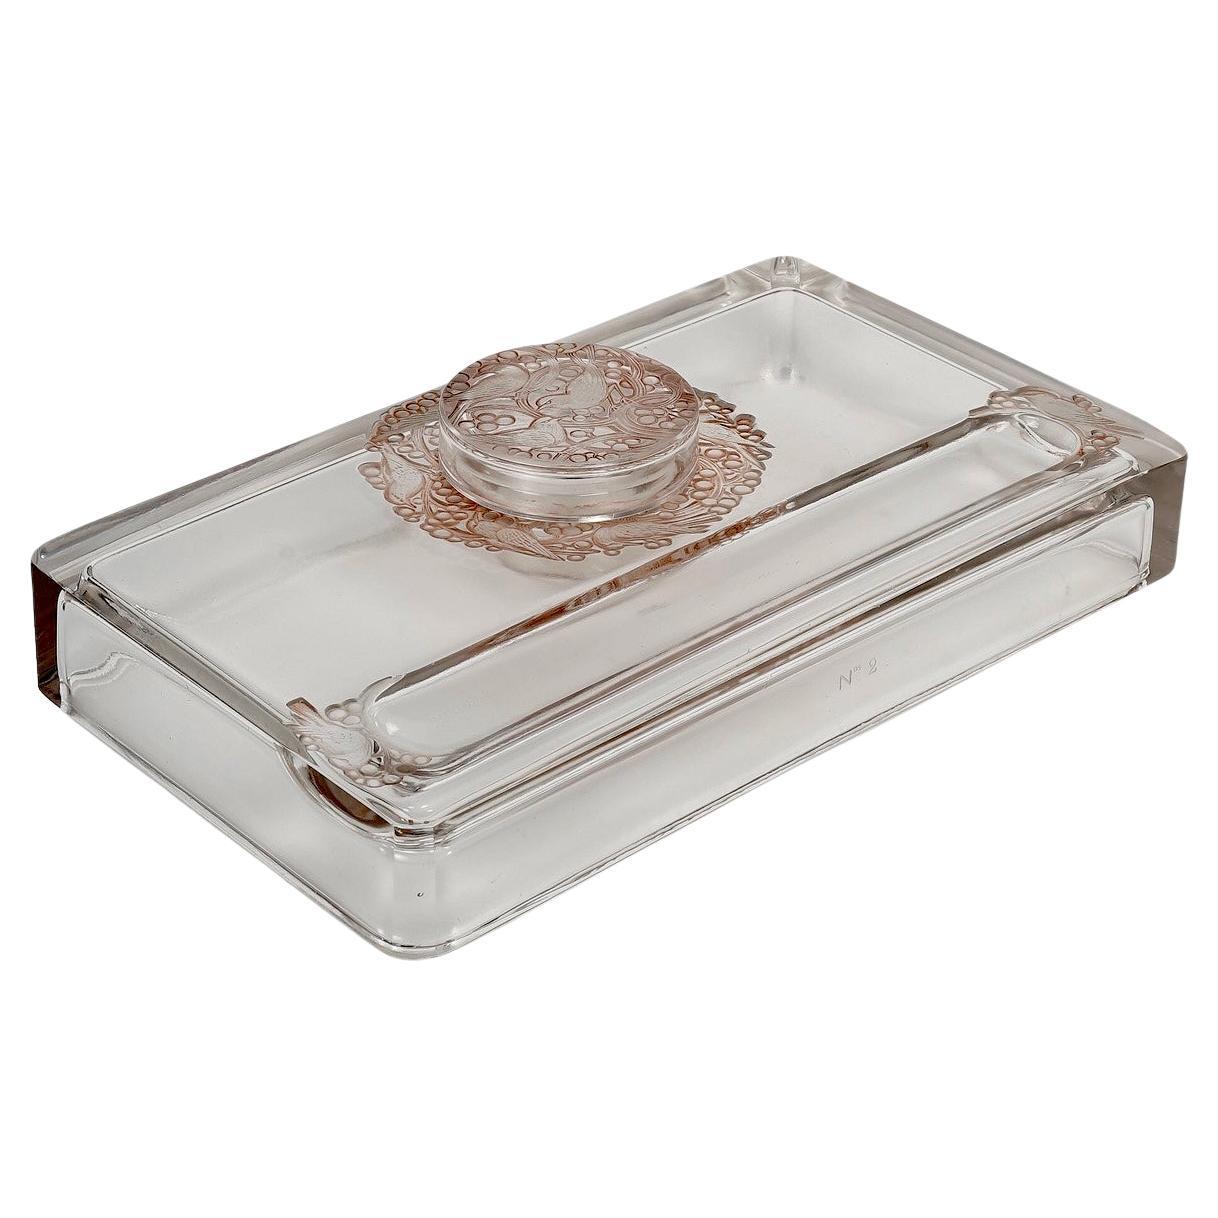 1924 René Lalique - Inkwell Colbert Glass With Sepia Patina - N°2/50 For Sale